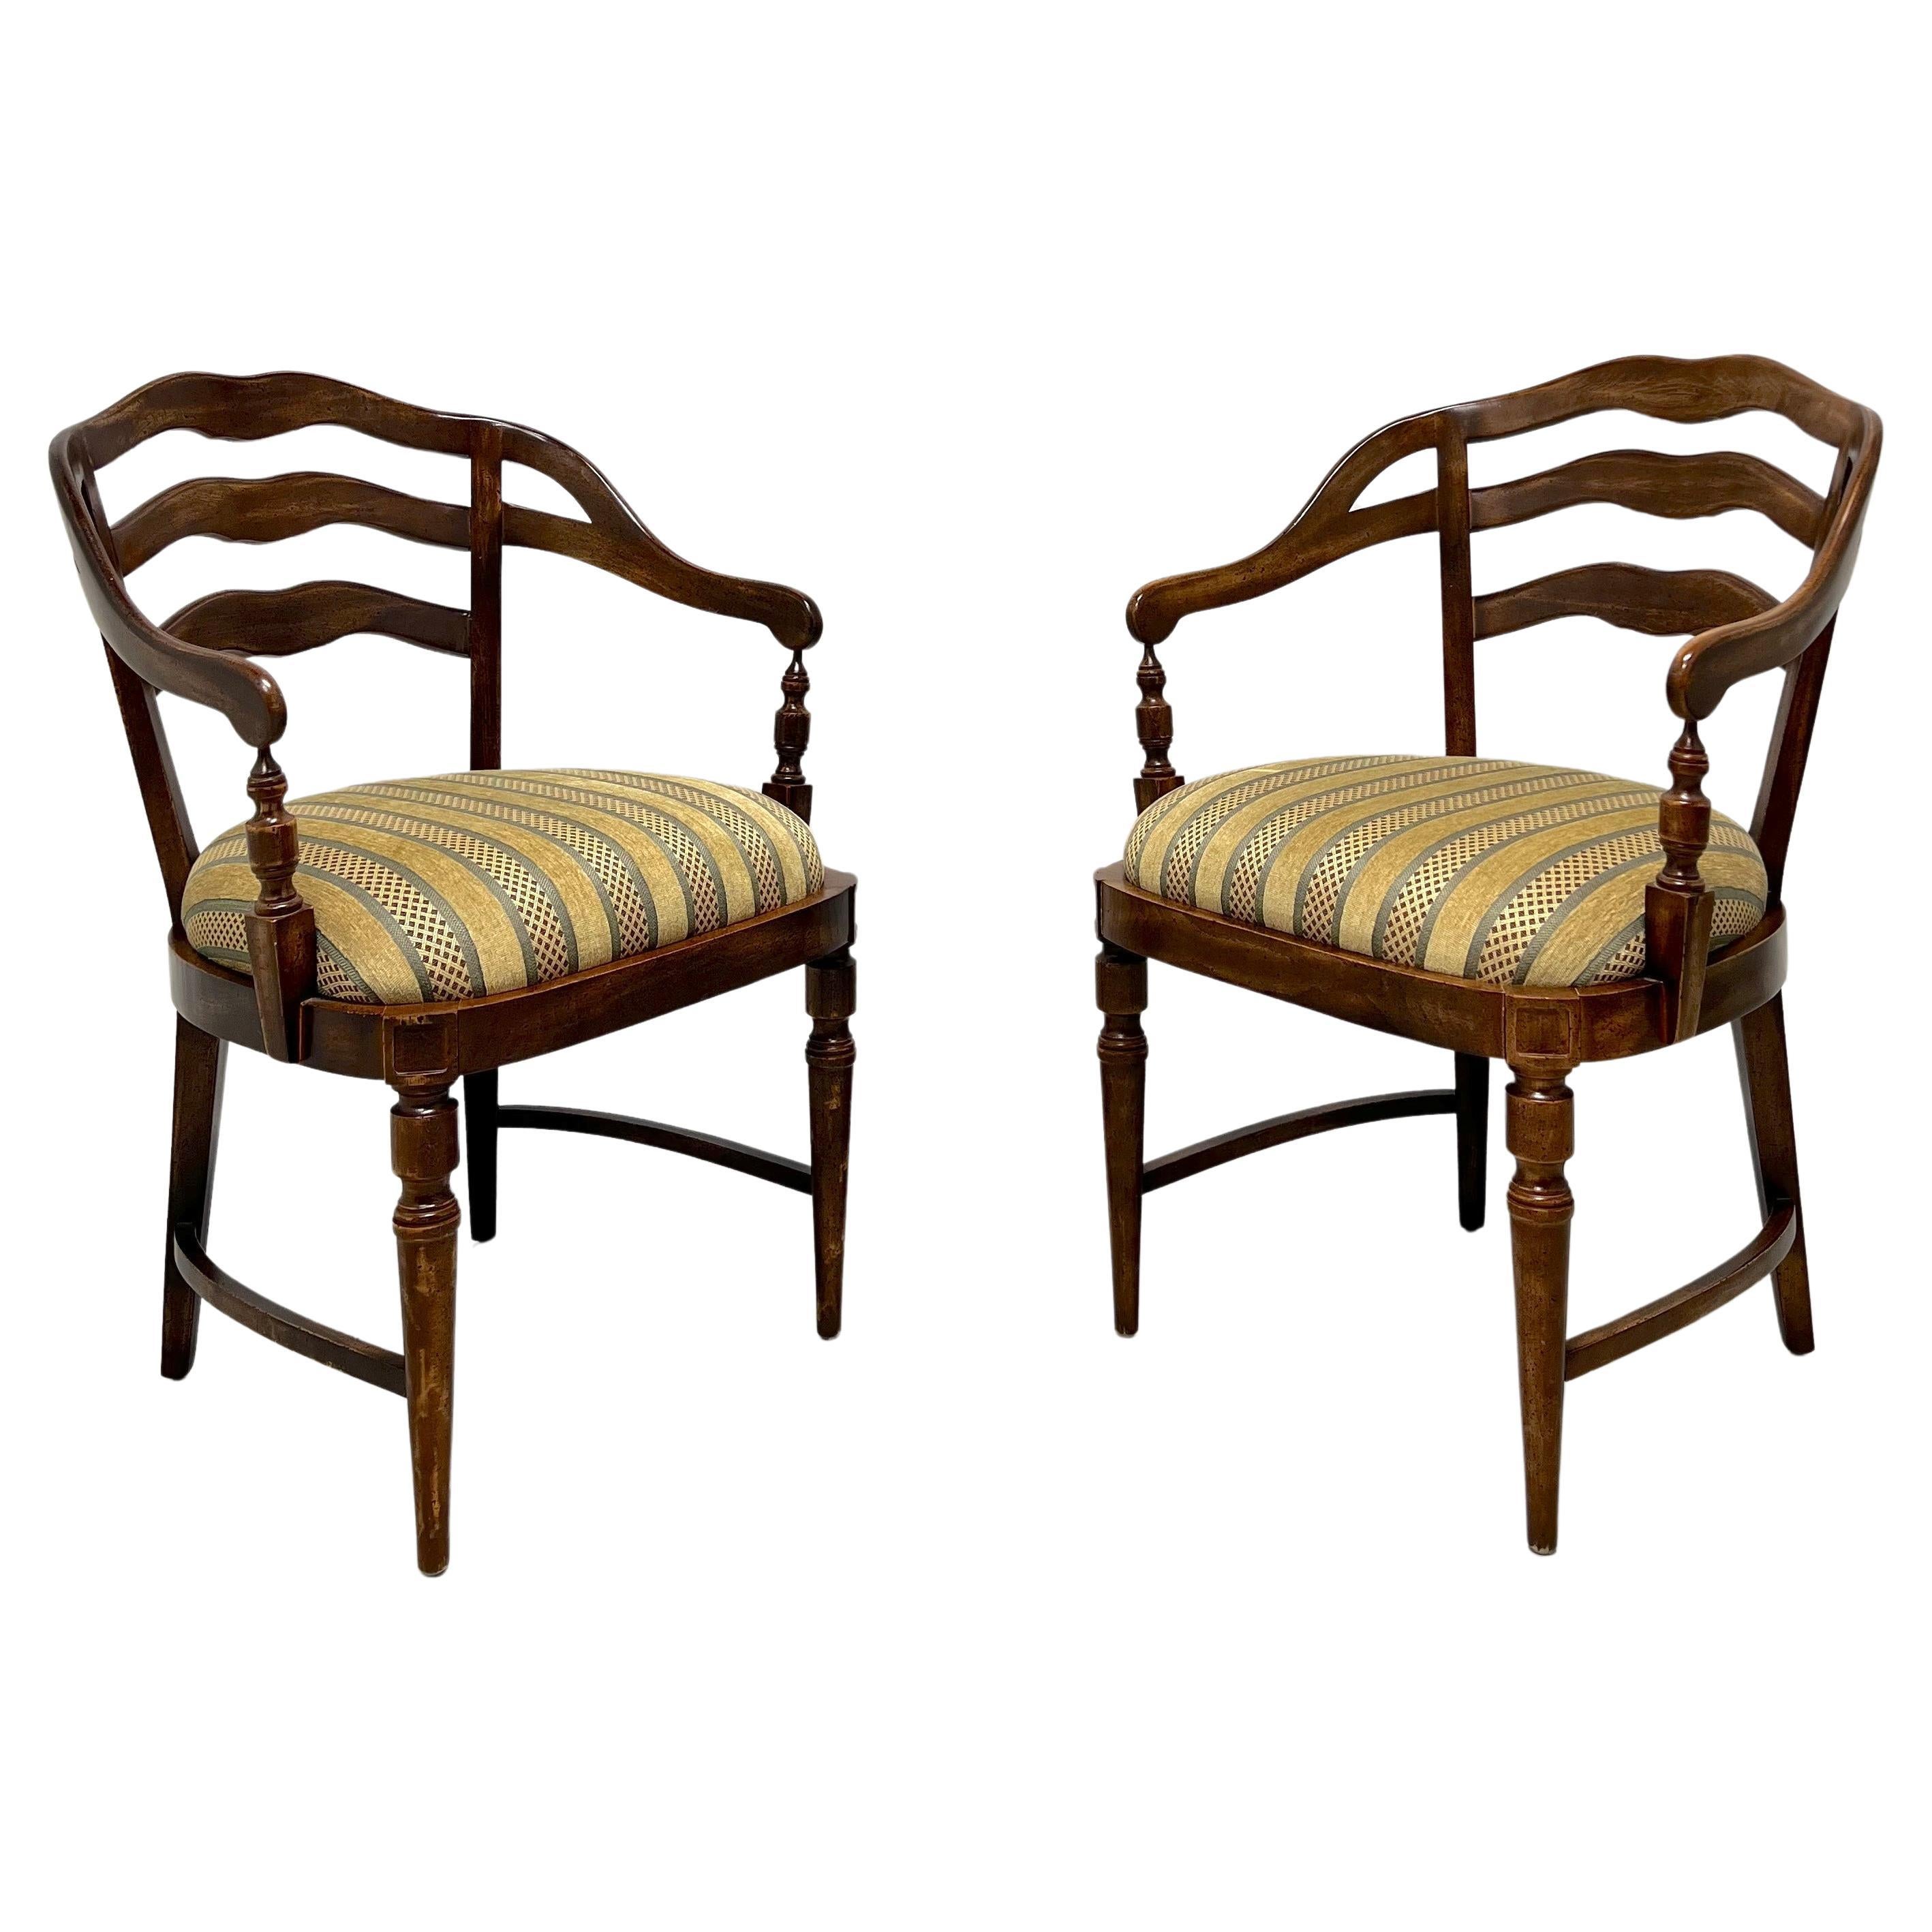 Mid 20th Century Maple French Country Barrel Chairs - Pair For Sale